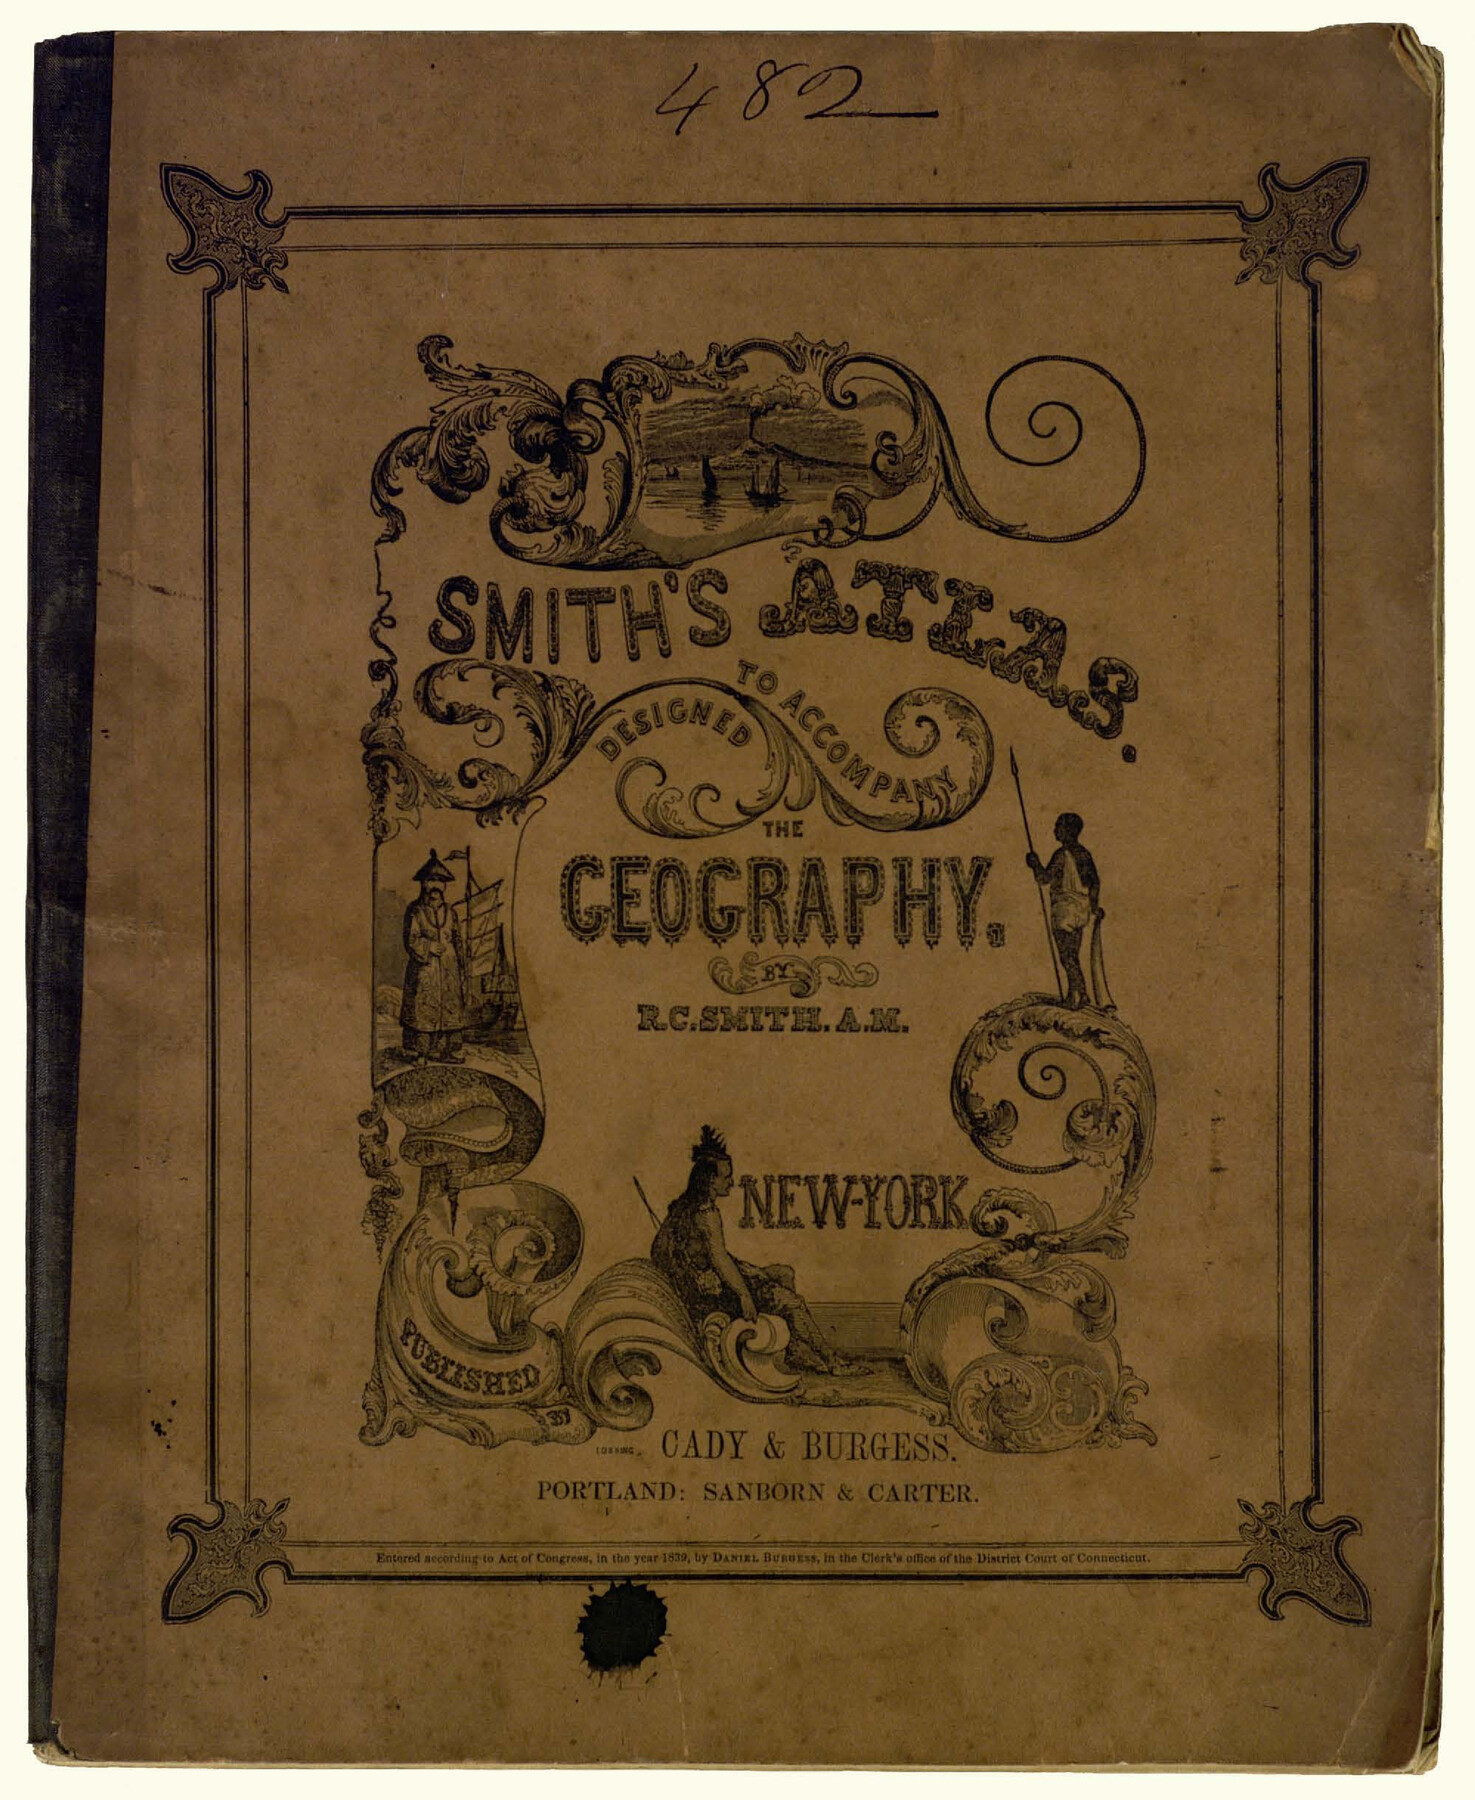 93881, Smith's Atlas designed to accompany the Geography, Holcomb Digital Map Collection